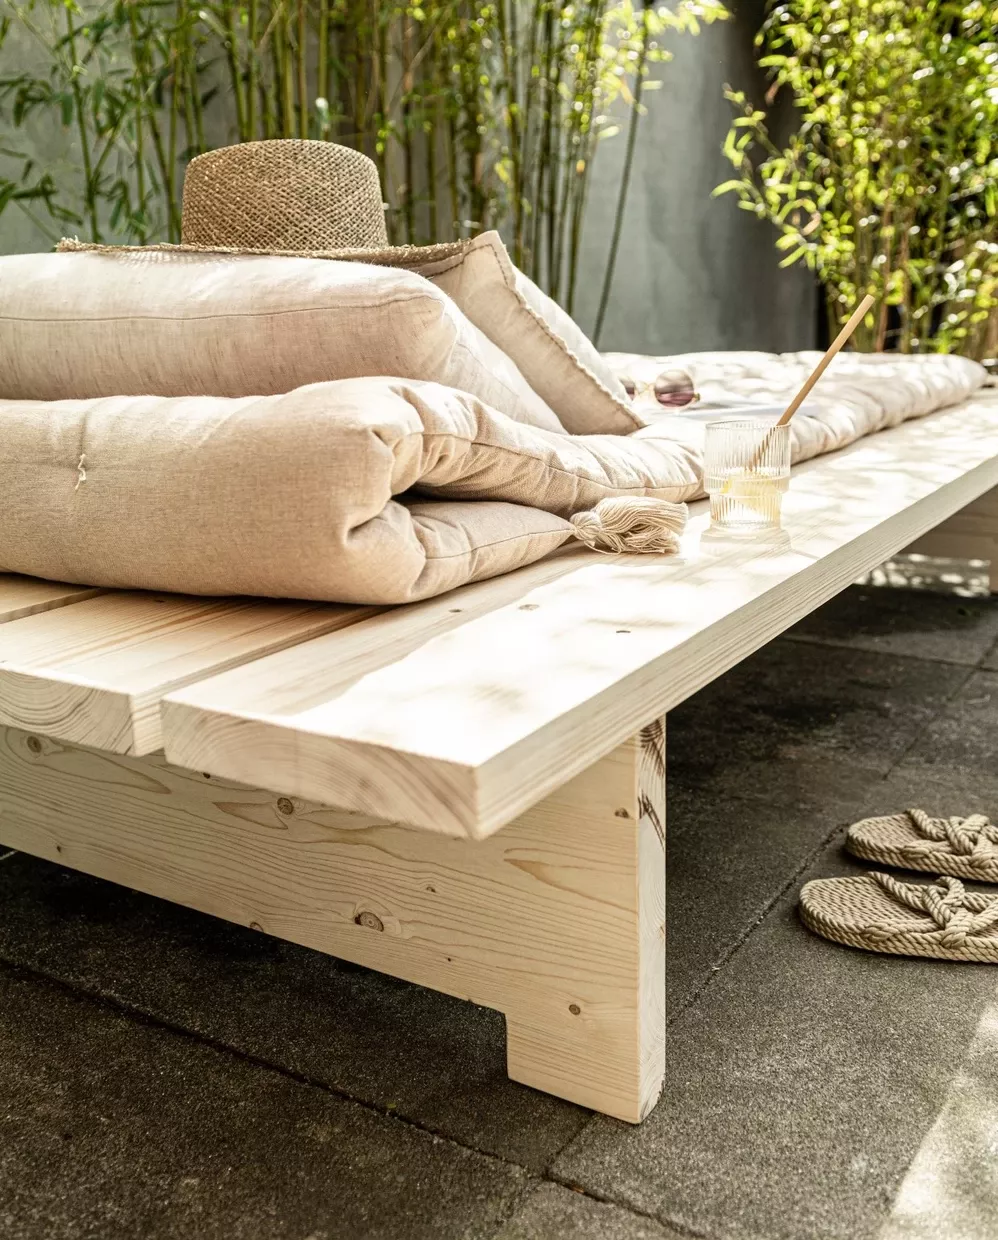 The Ultimate Guide to Outdoor Daybeds:
Tips for Choosing the Perfect Option